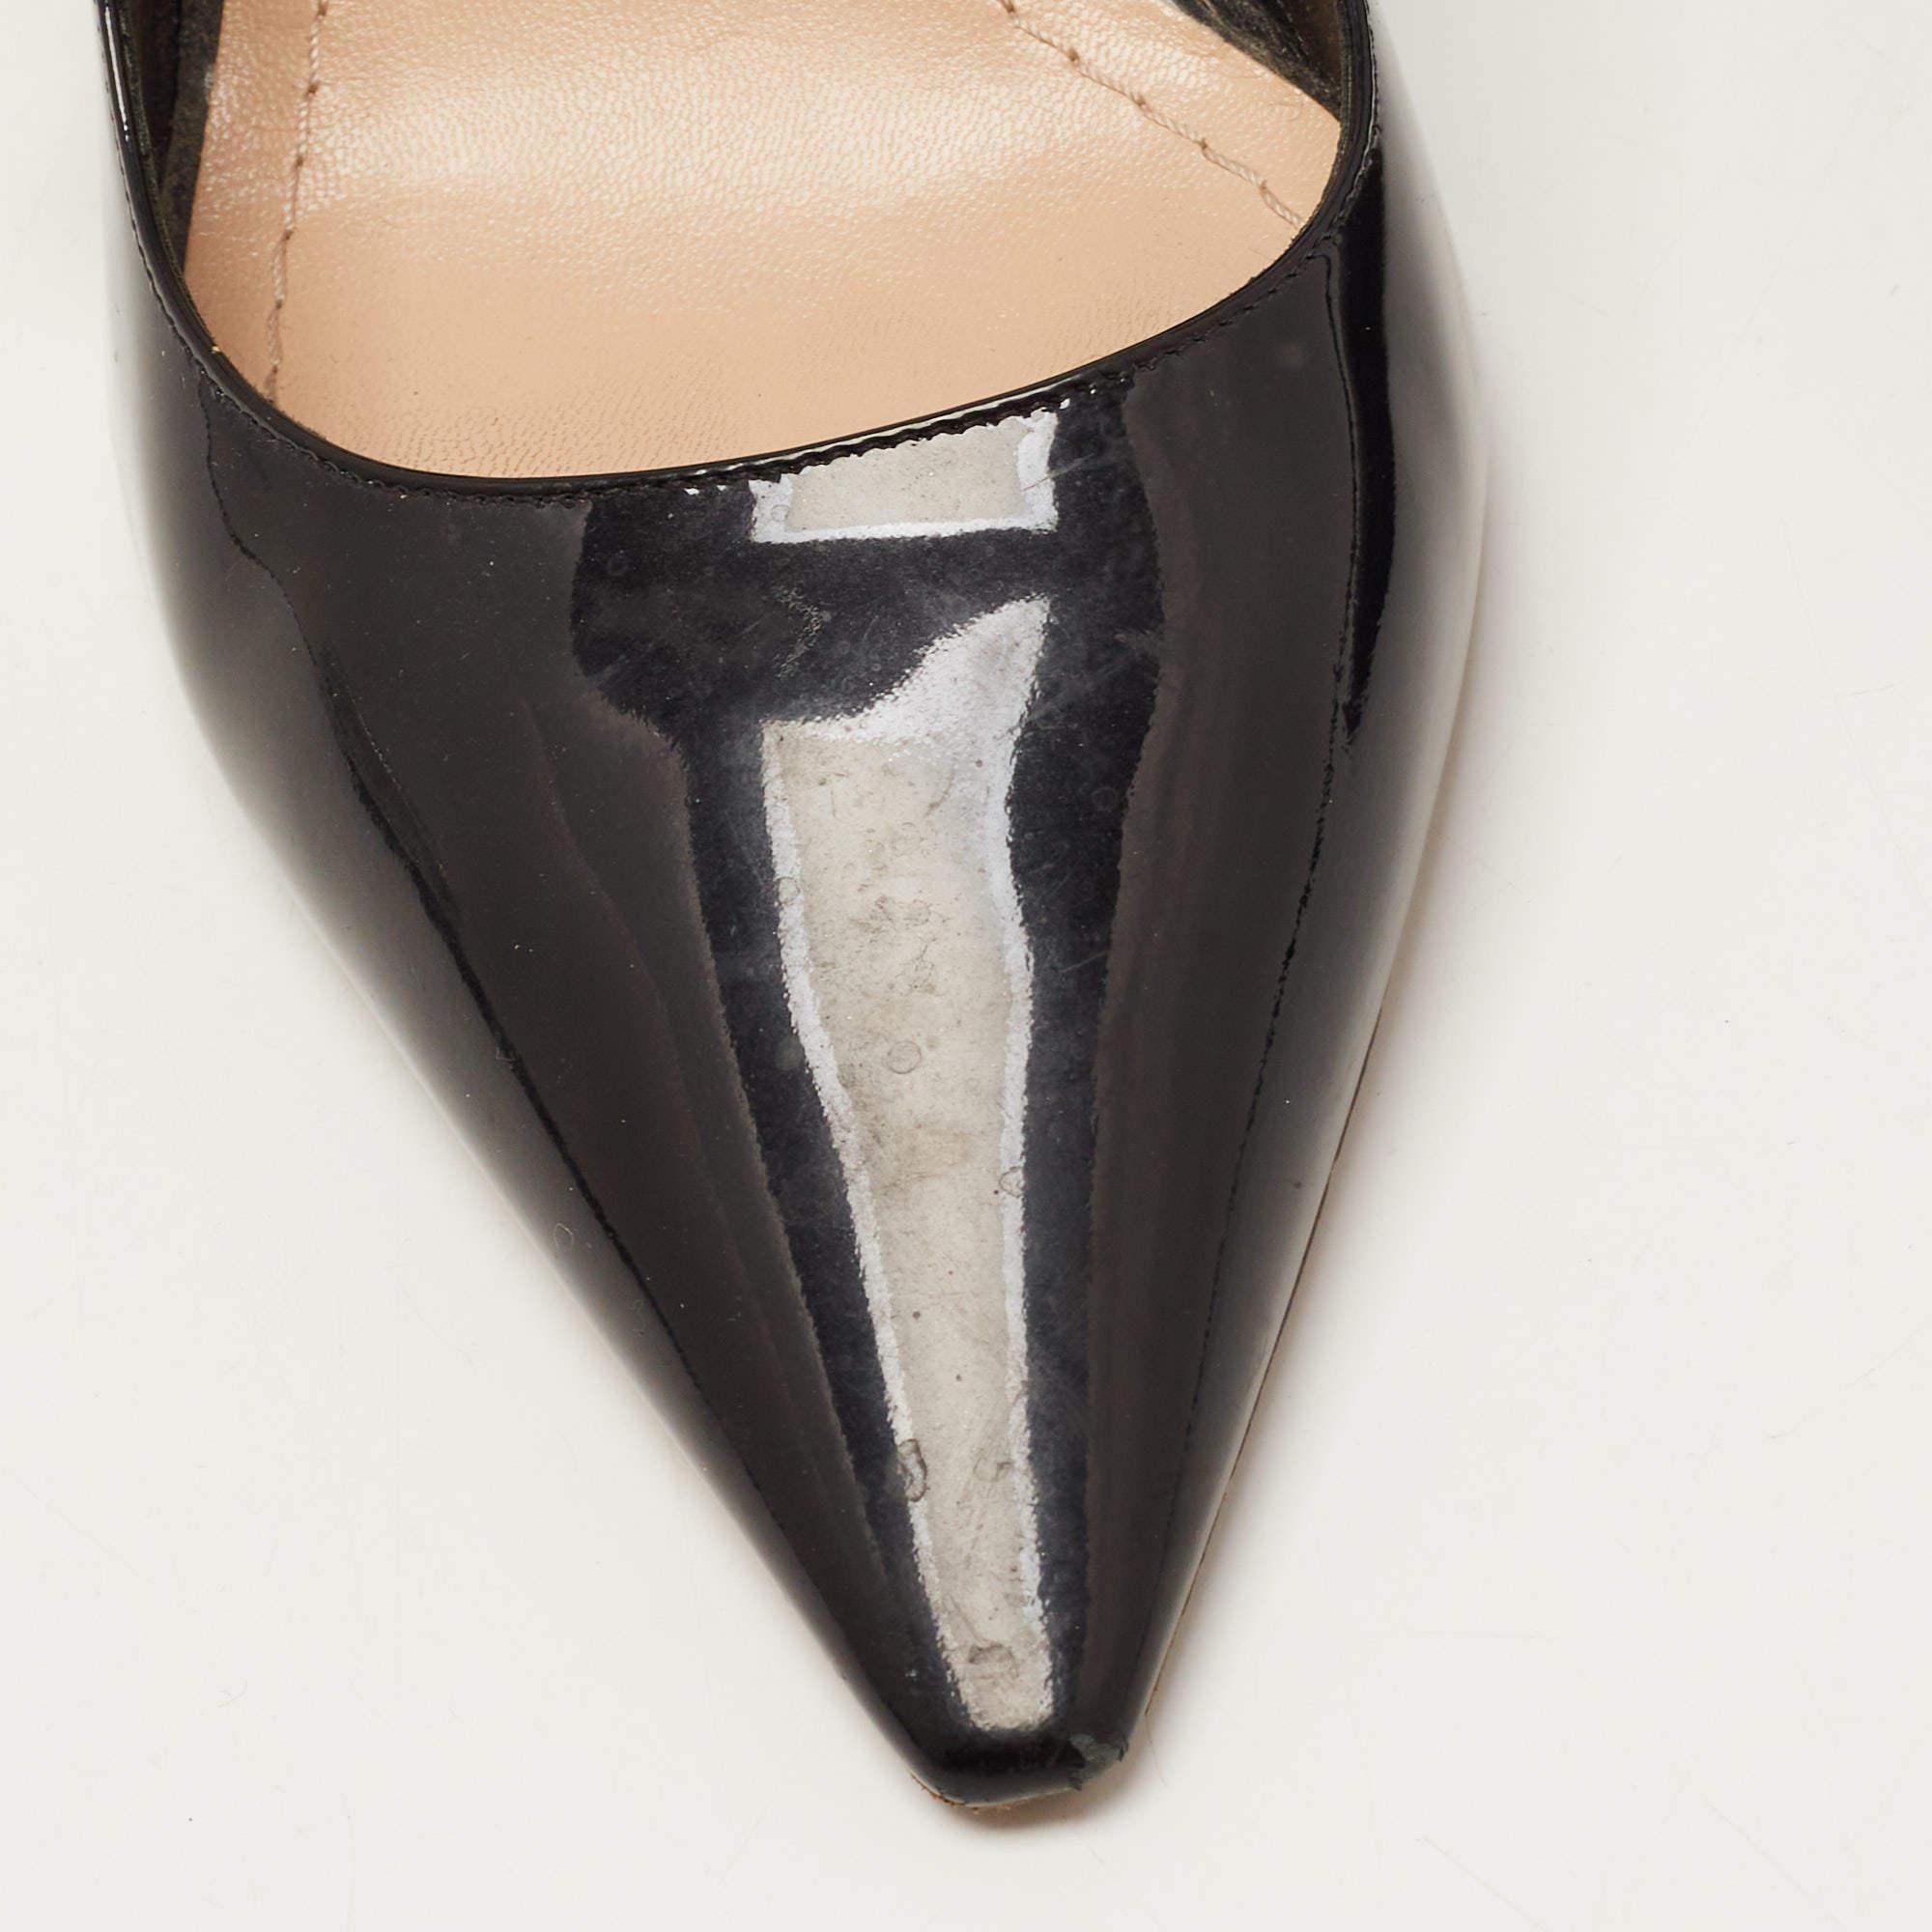 These timeless Dior slingback shoes are meant to last you season after season. They have a comfortable fit and high-quality finish.